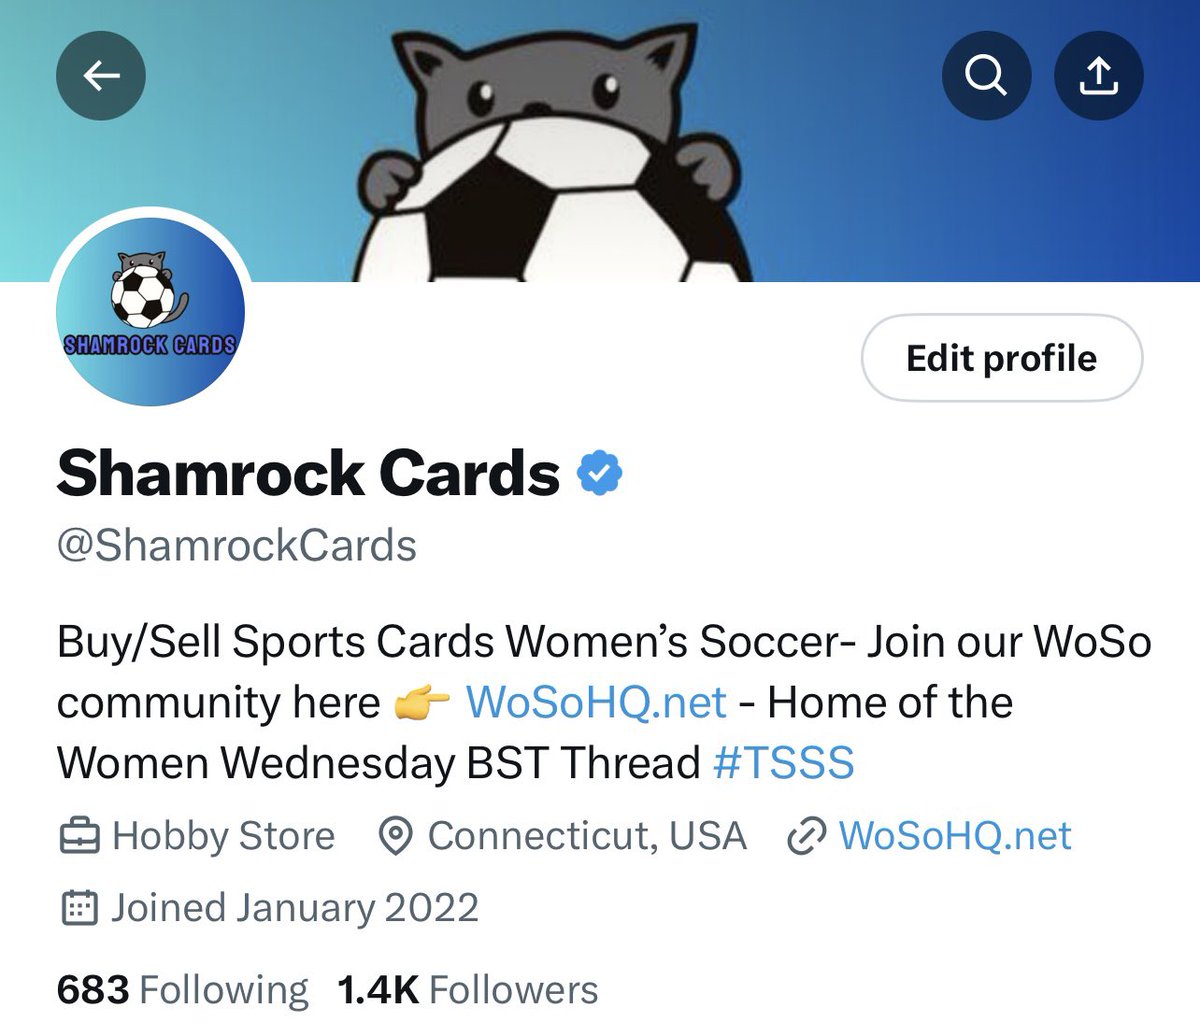 Thank you all for 1400! I hope you find some value in the women’s soccer information and card pulls that are shared here 🫶🫶